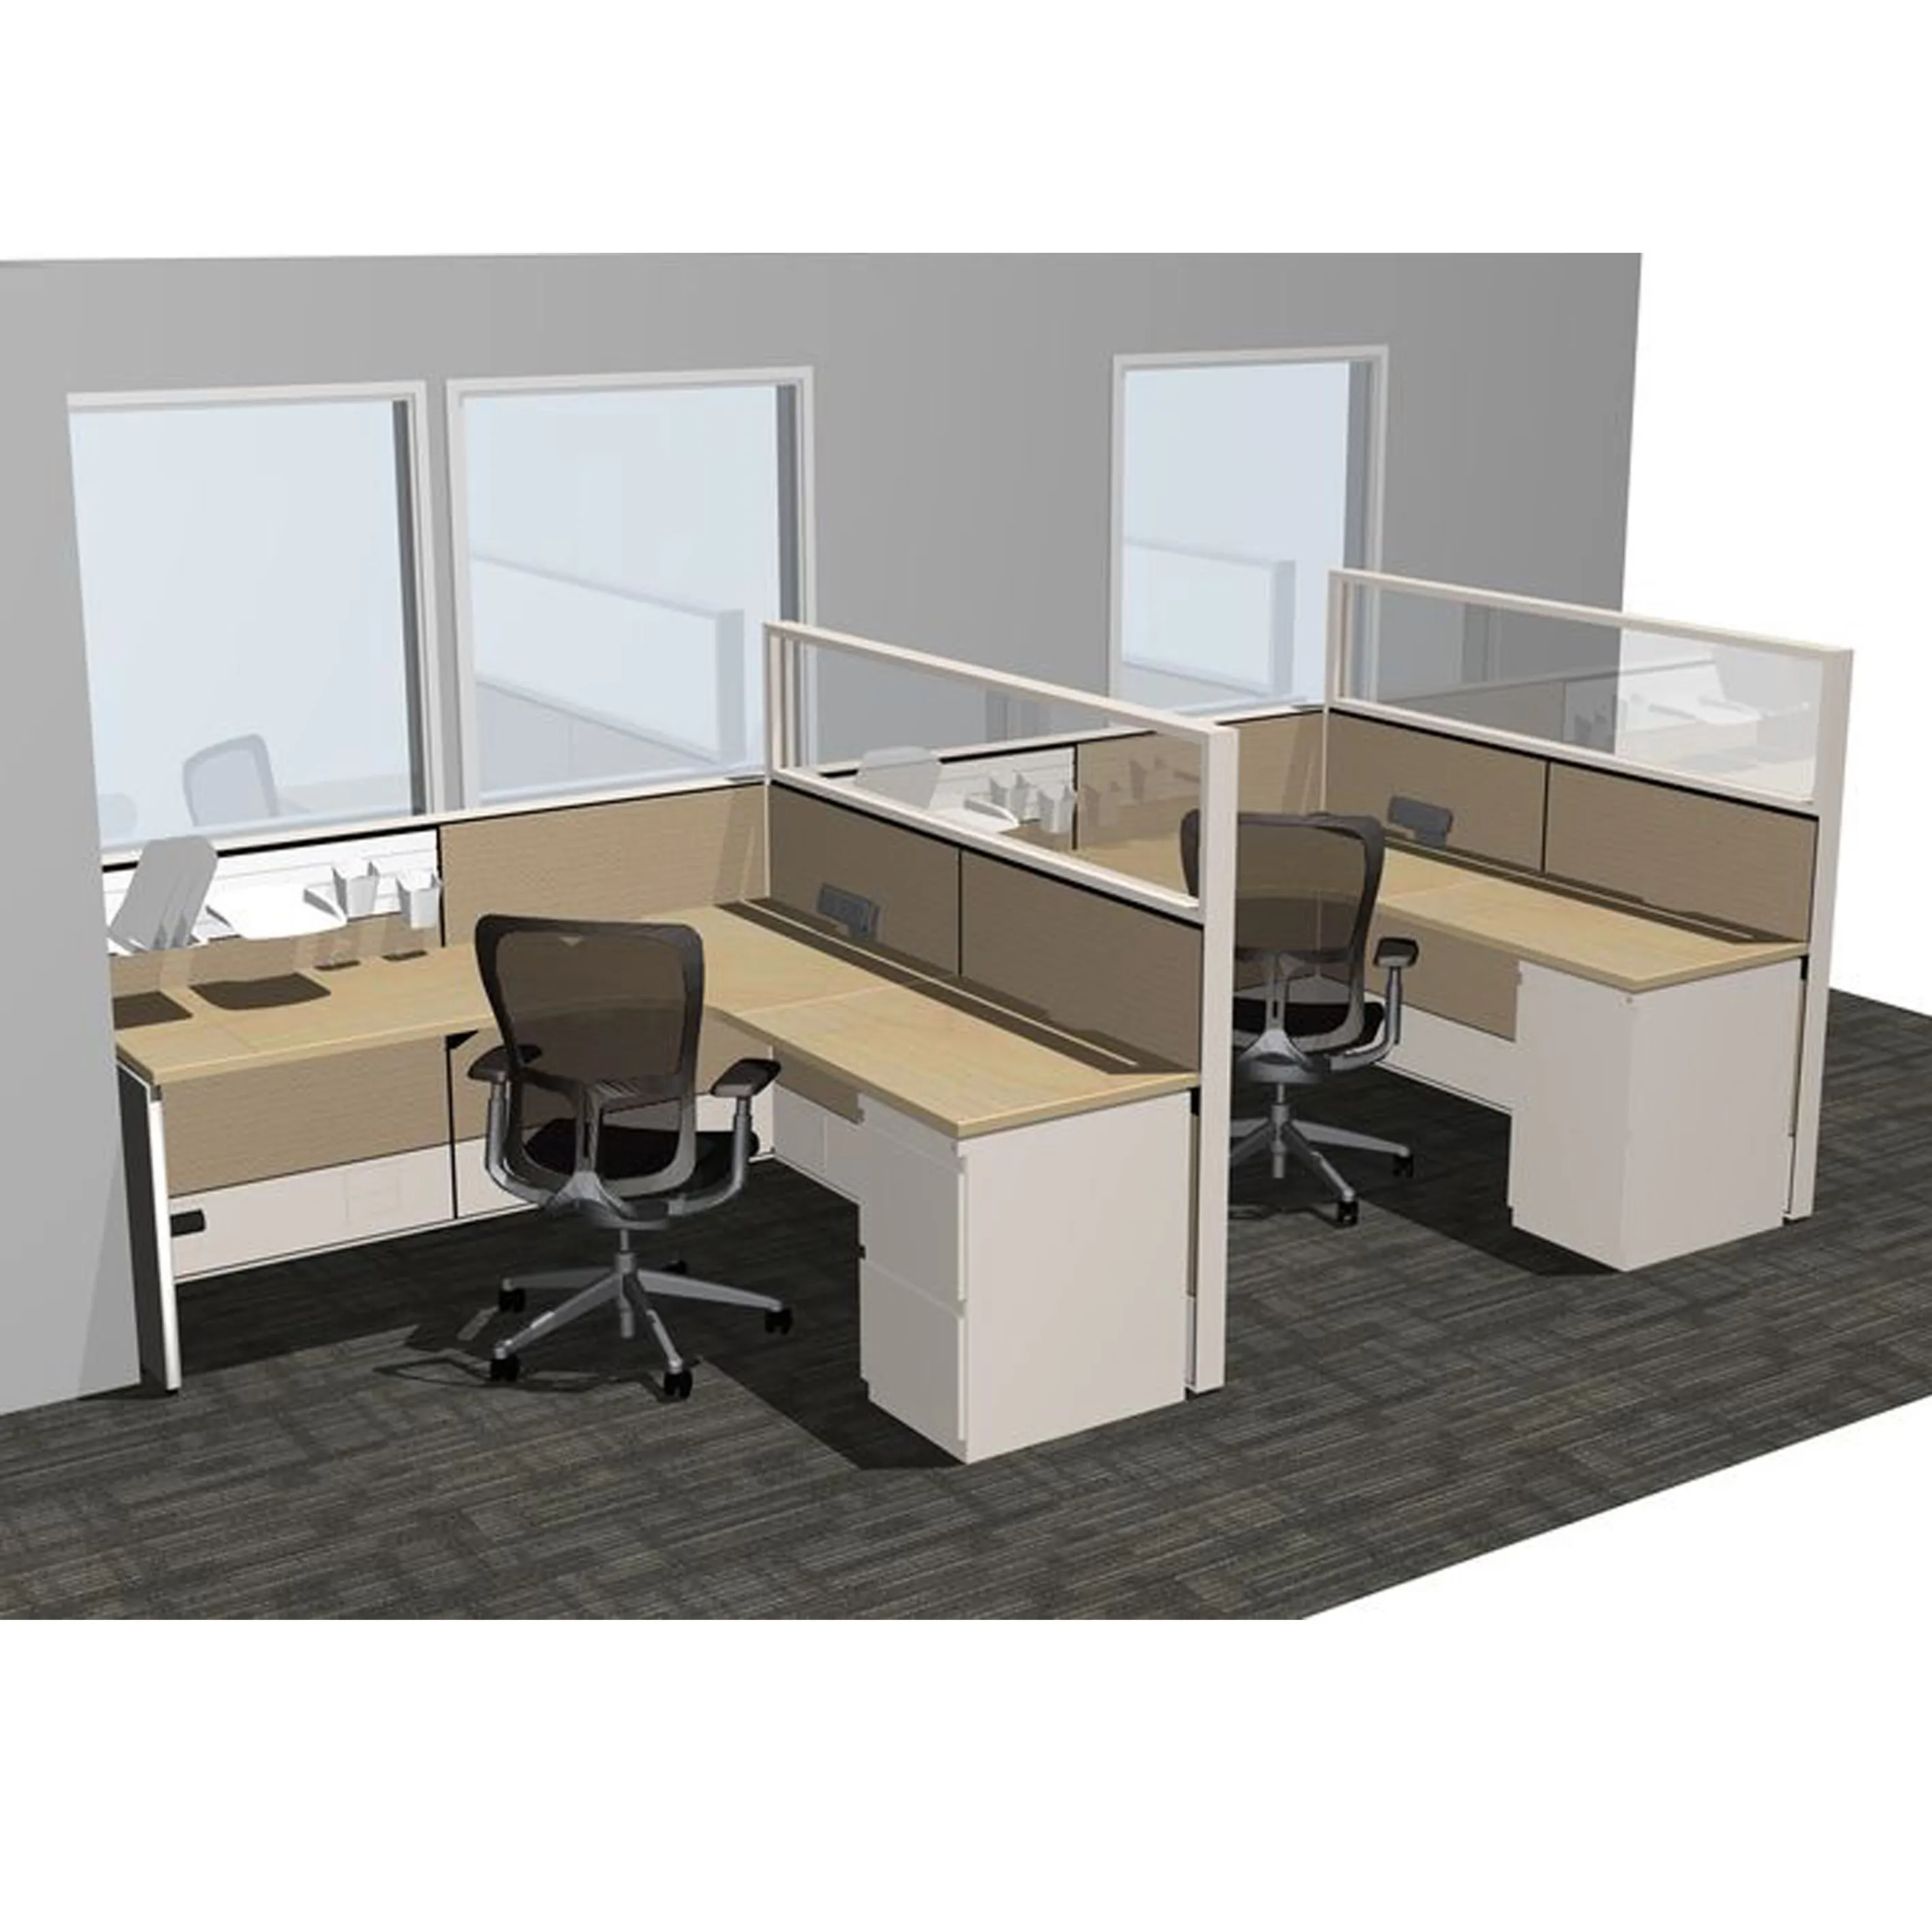 Factory Price Office Divider Cubicles With 2 Drawer Pedestal L Shape 2 Person Workstation With Glass Divider Office Desk